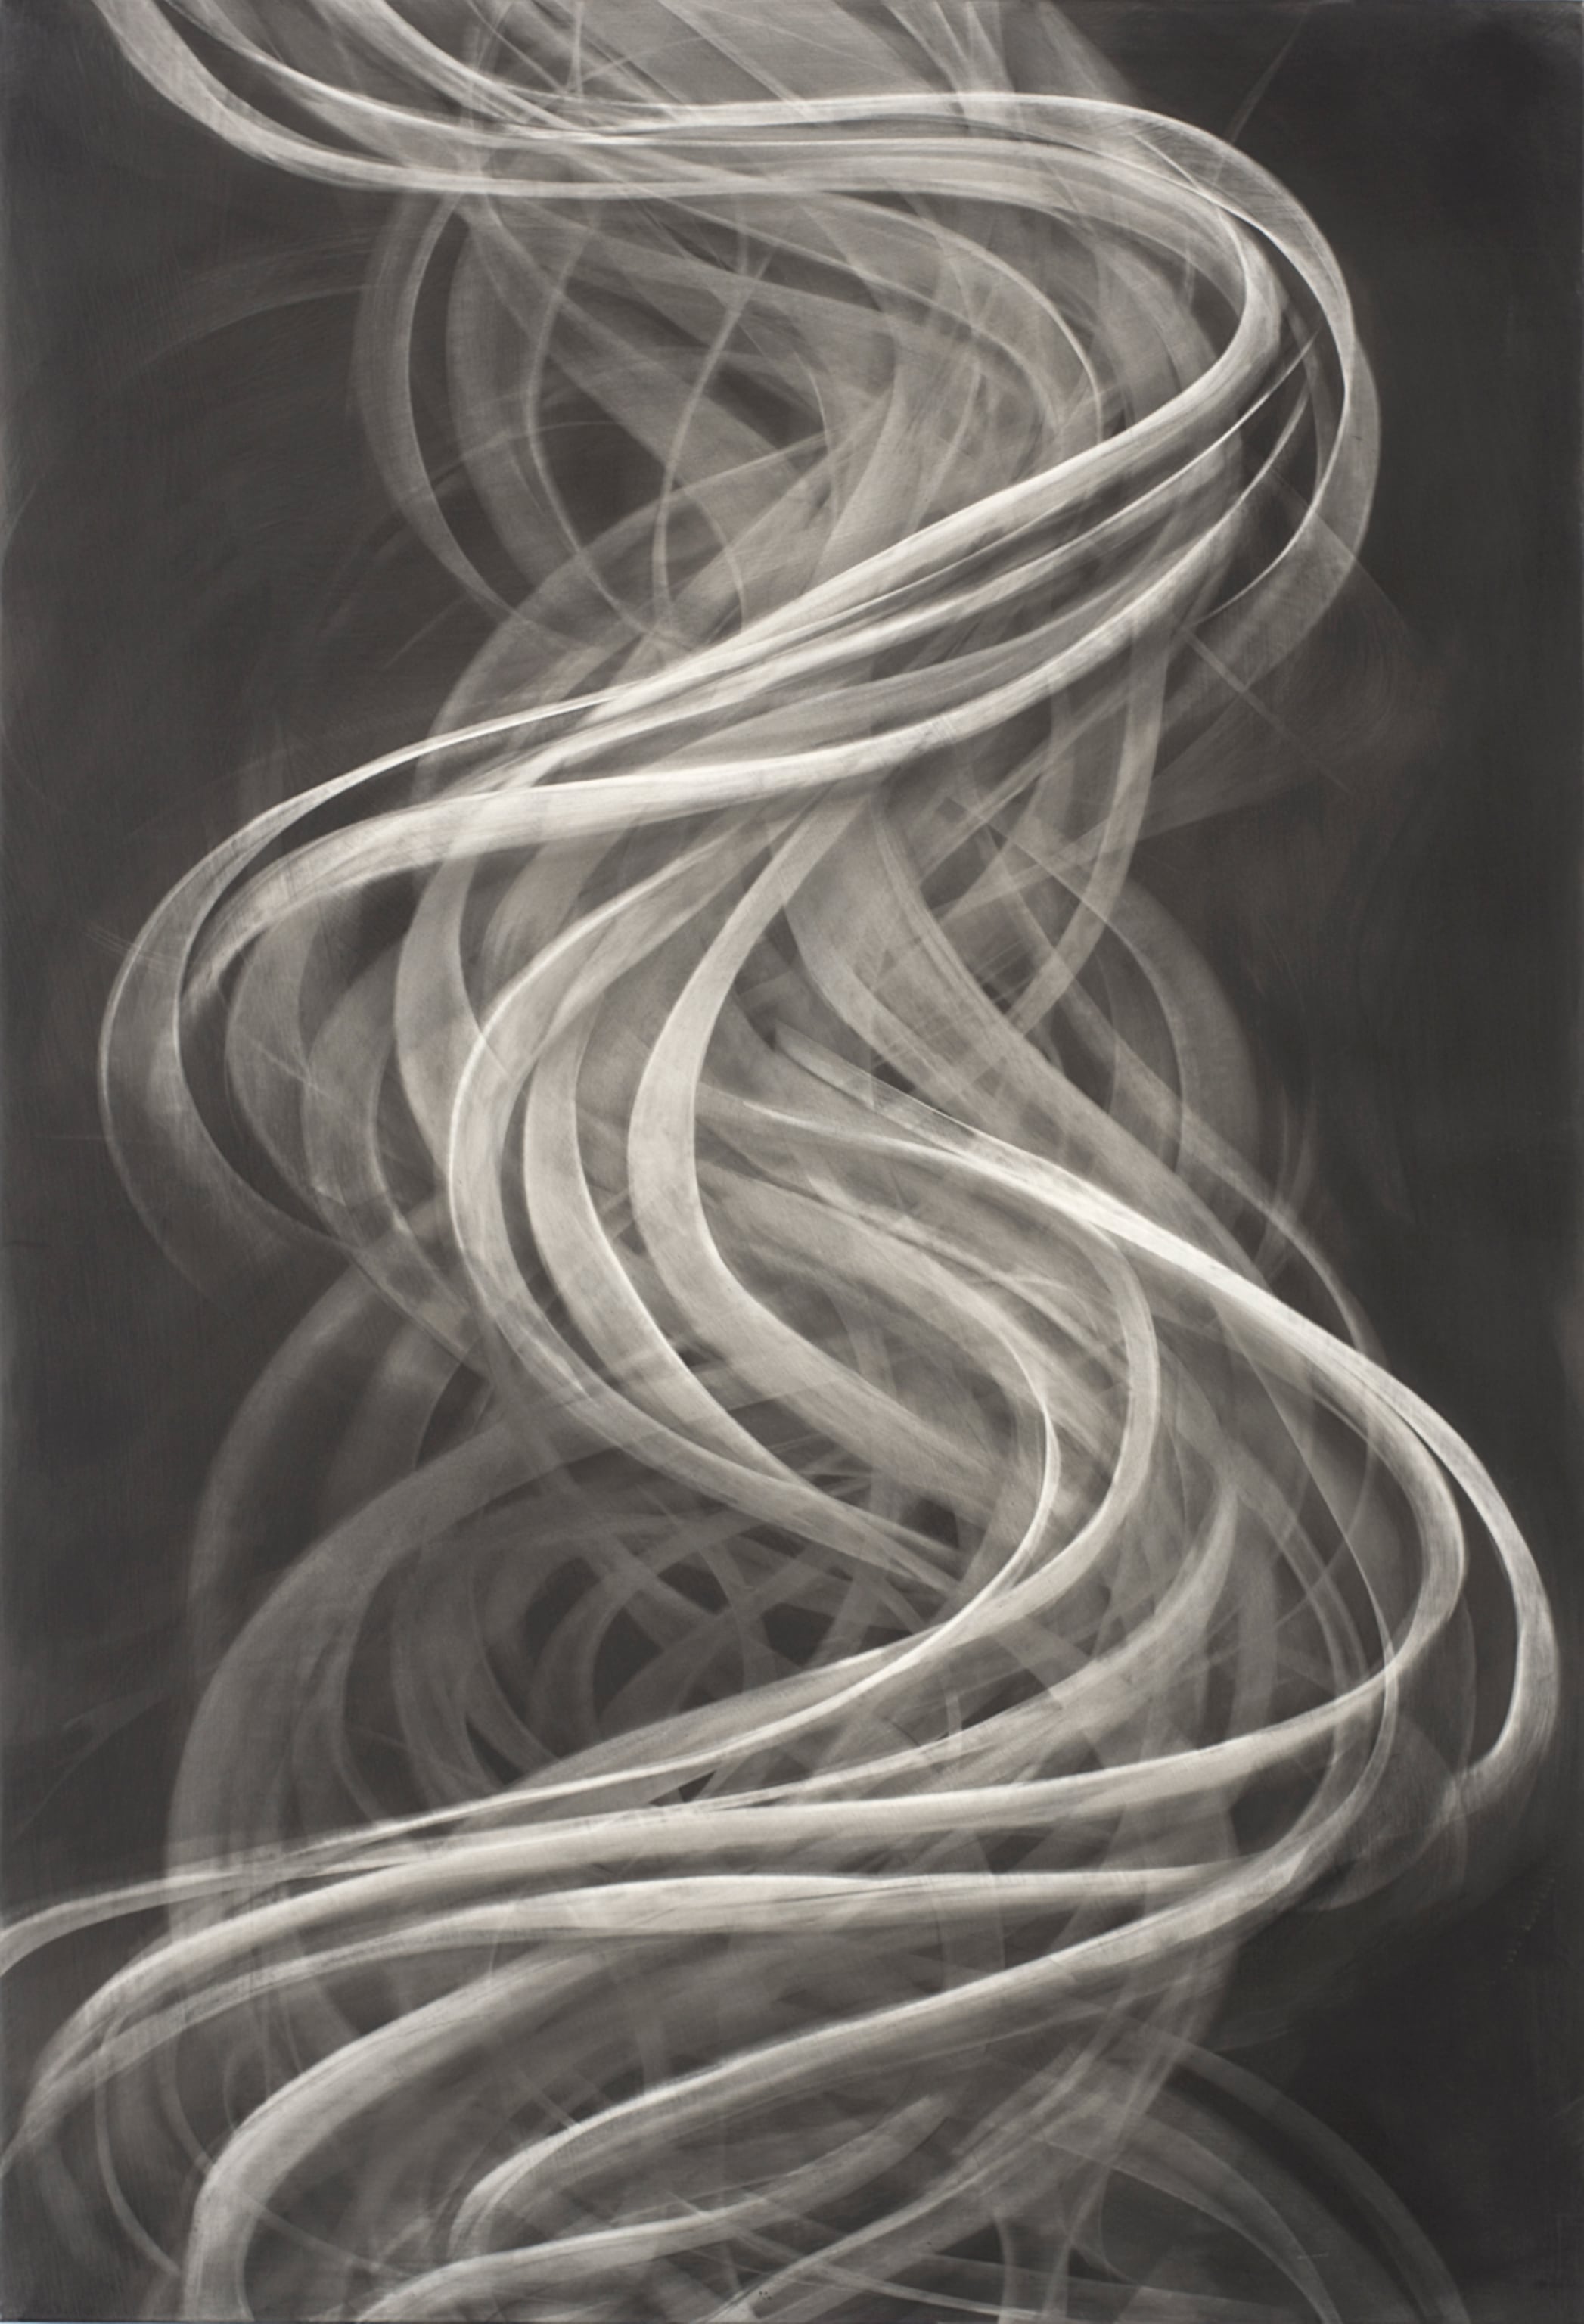 Degraw, 32 x 22 inches, oil, alkyd and graphite on linen, 2015